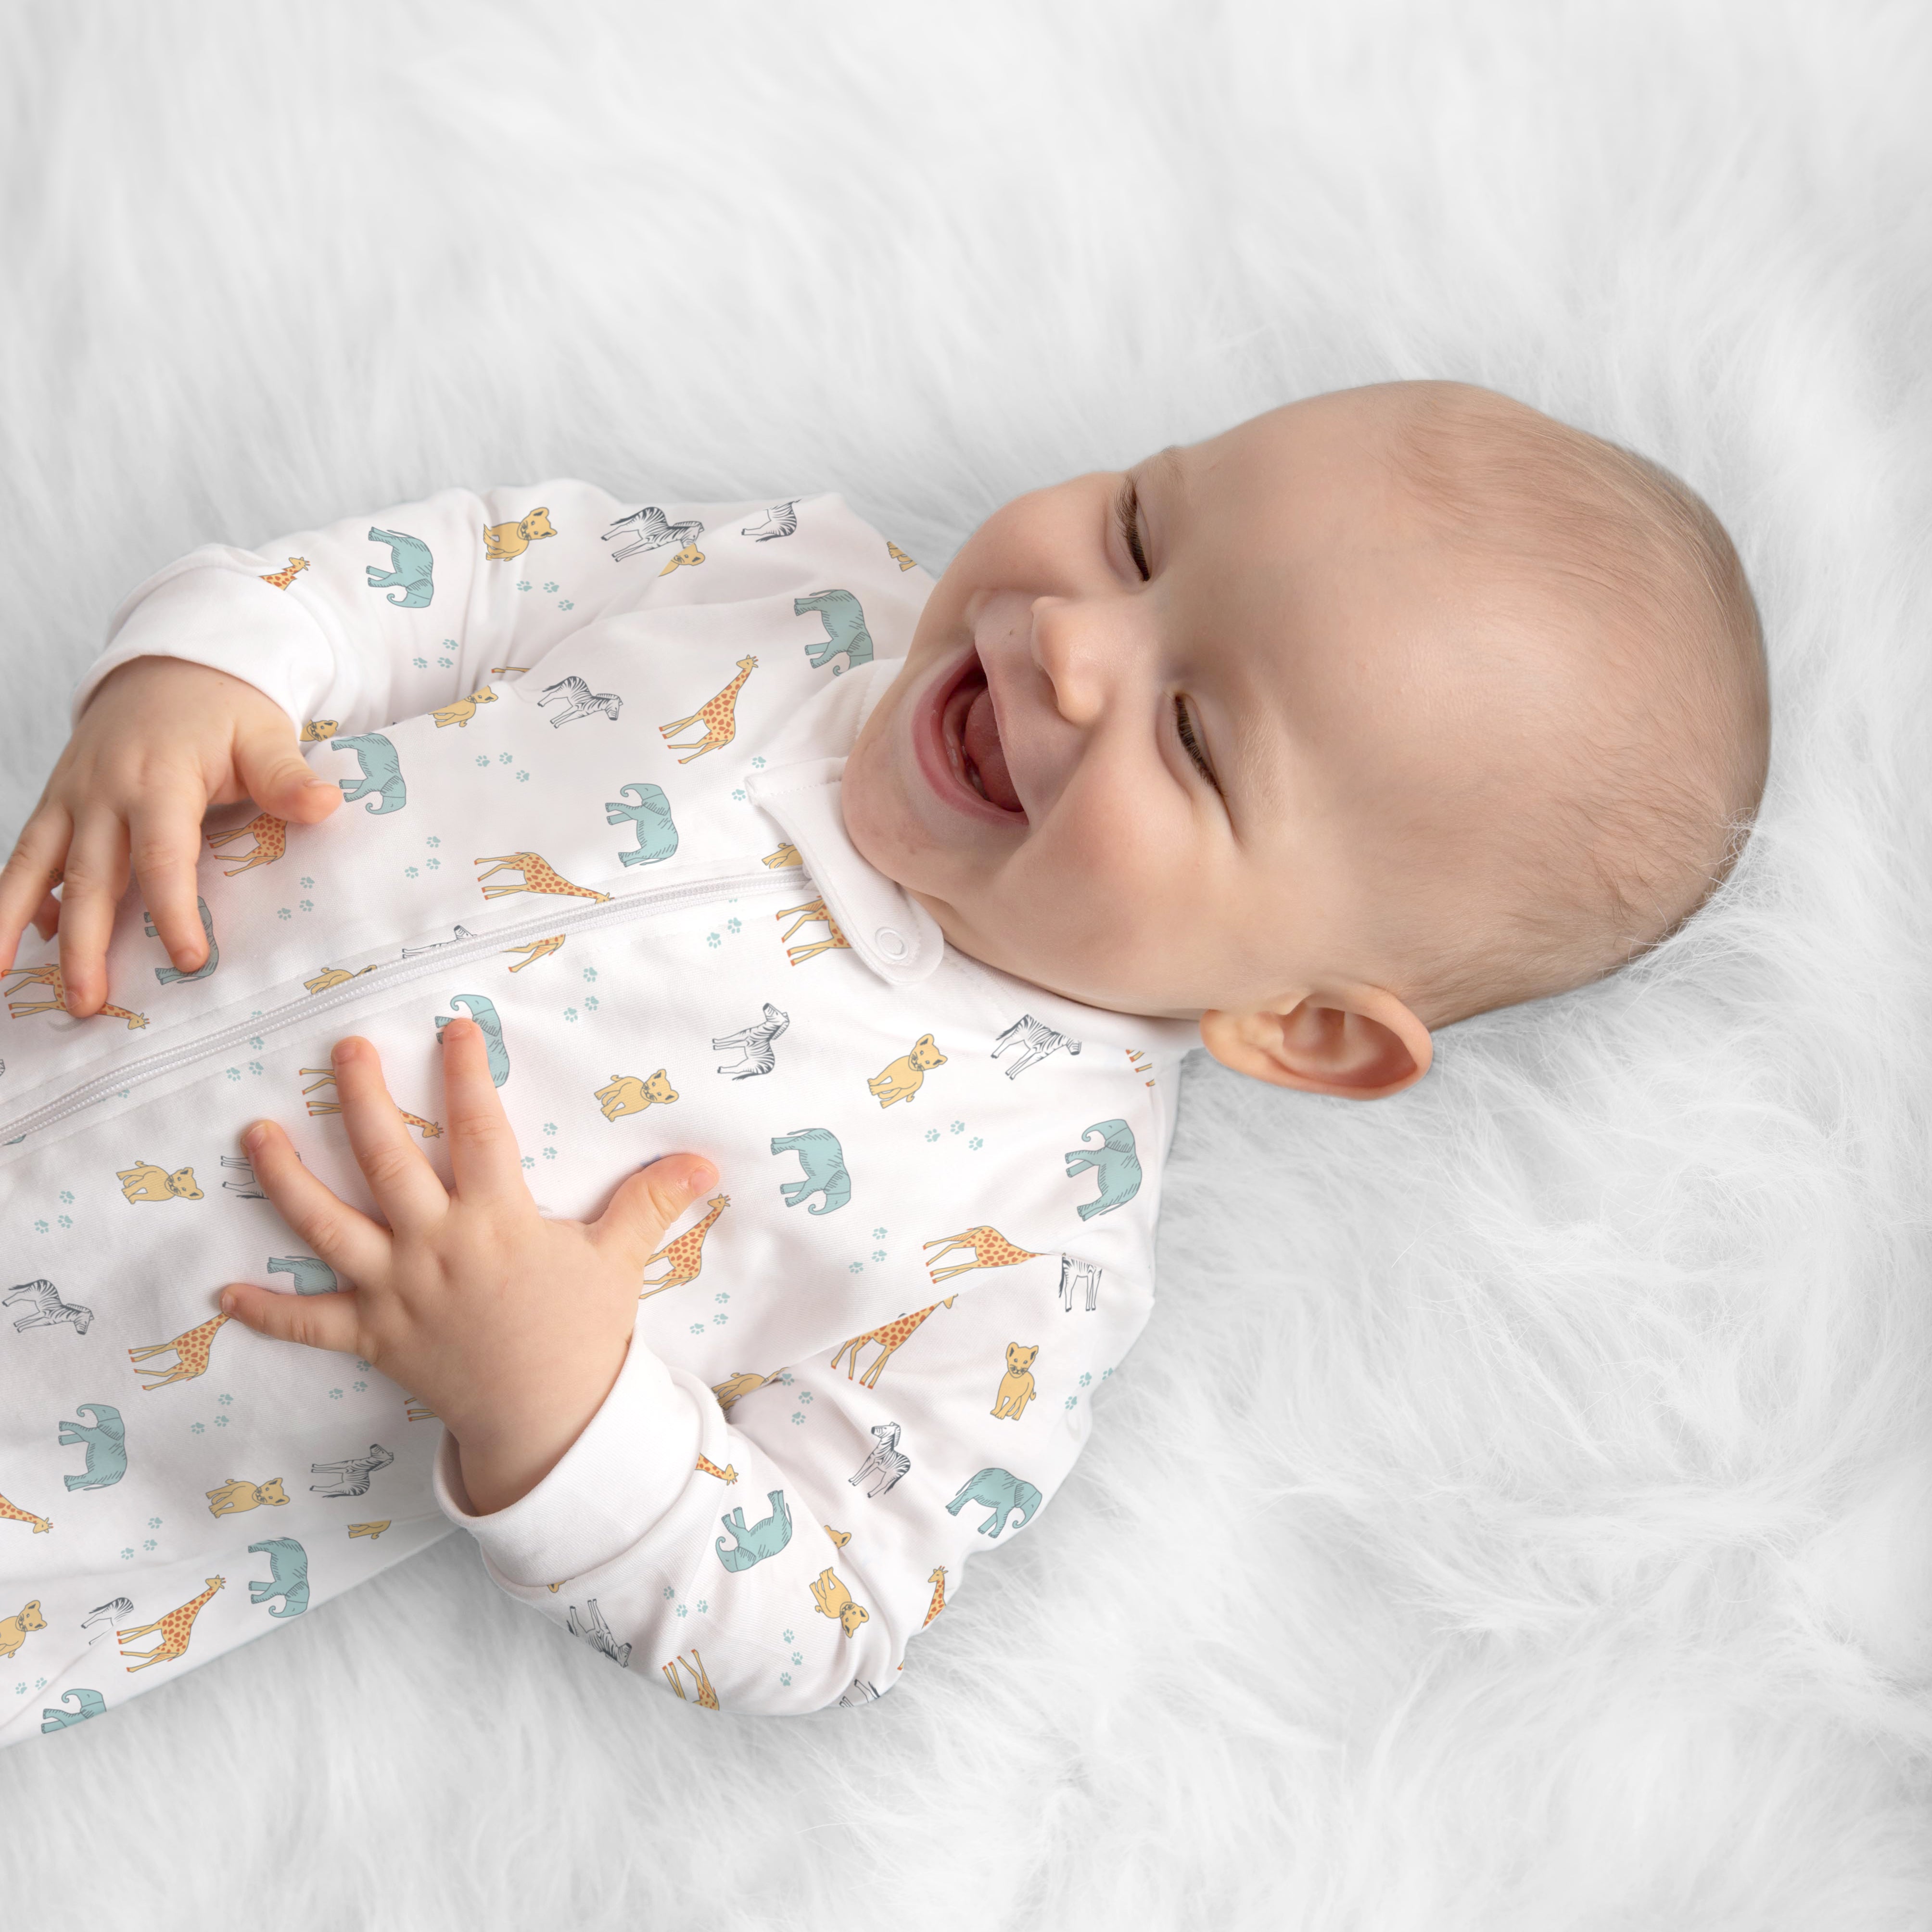 How Long do Babies Wear Newborn Clothes? They Outgrow them Quickly!